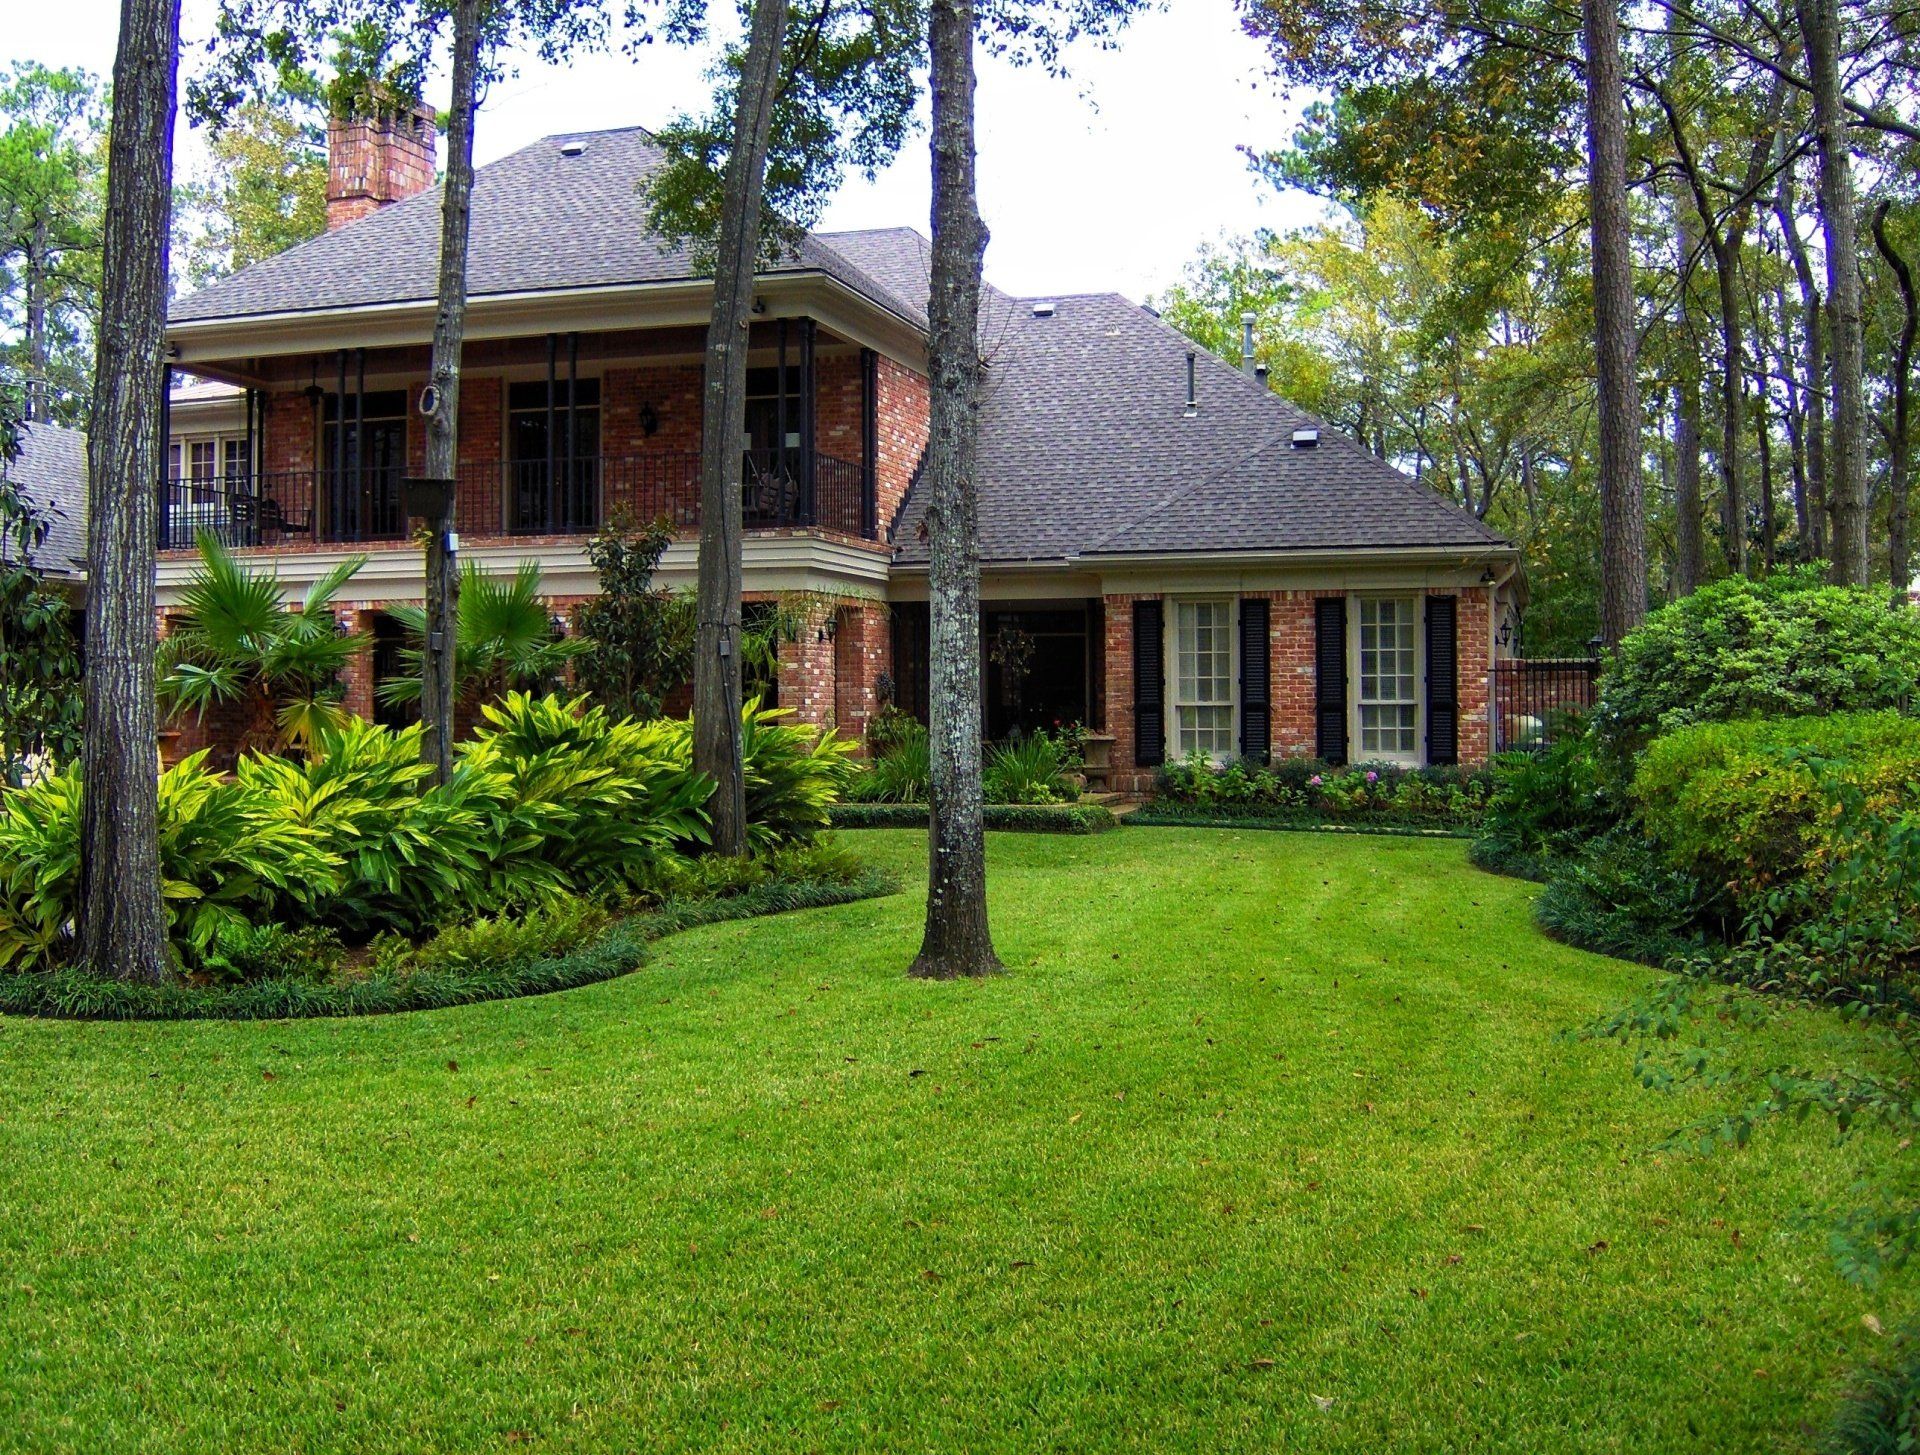 Landscaping Service in Spring Valley, TX